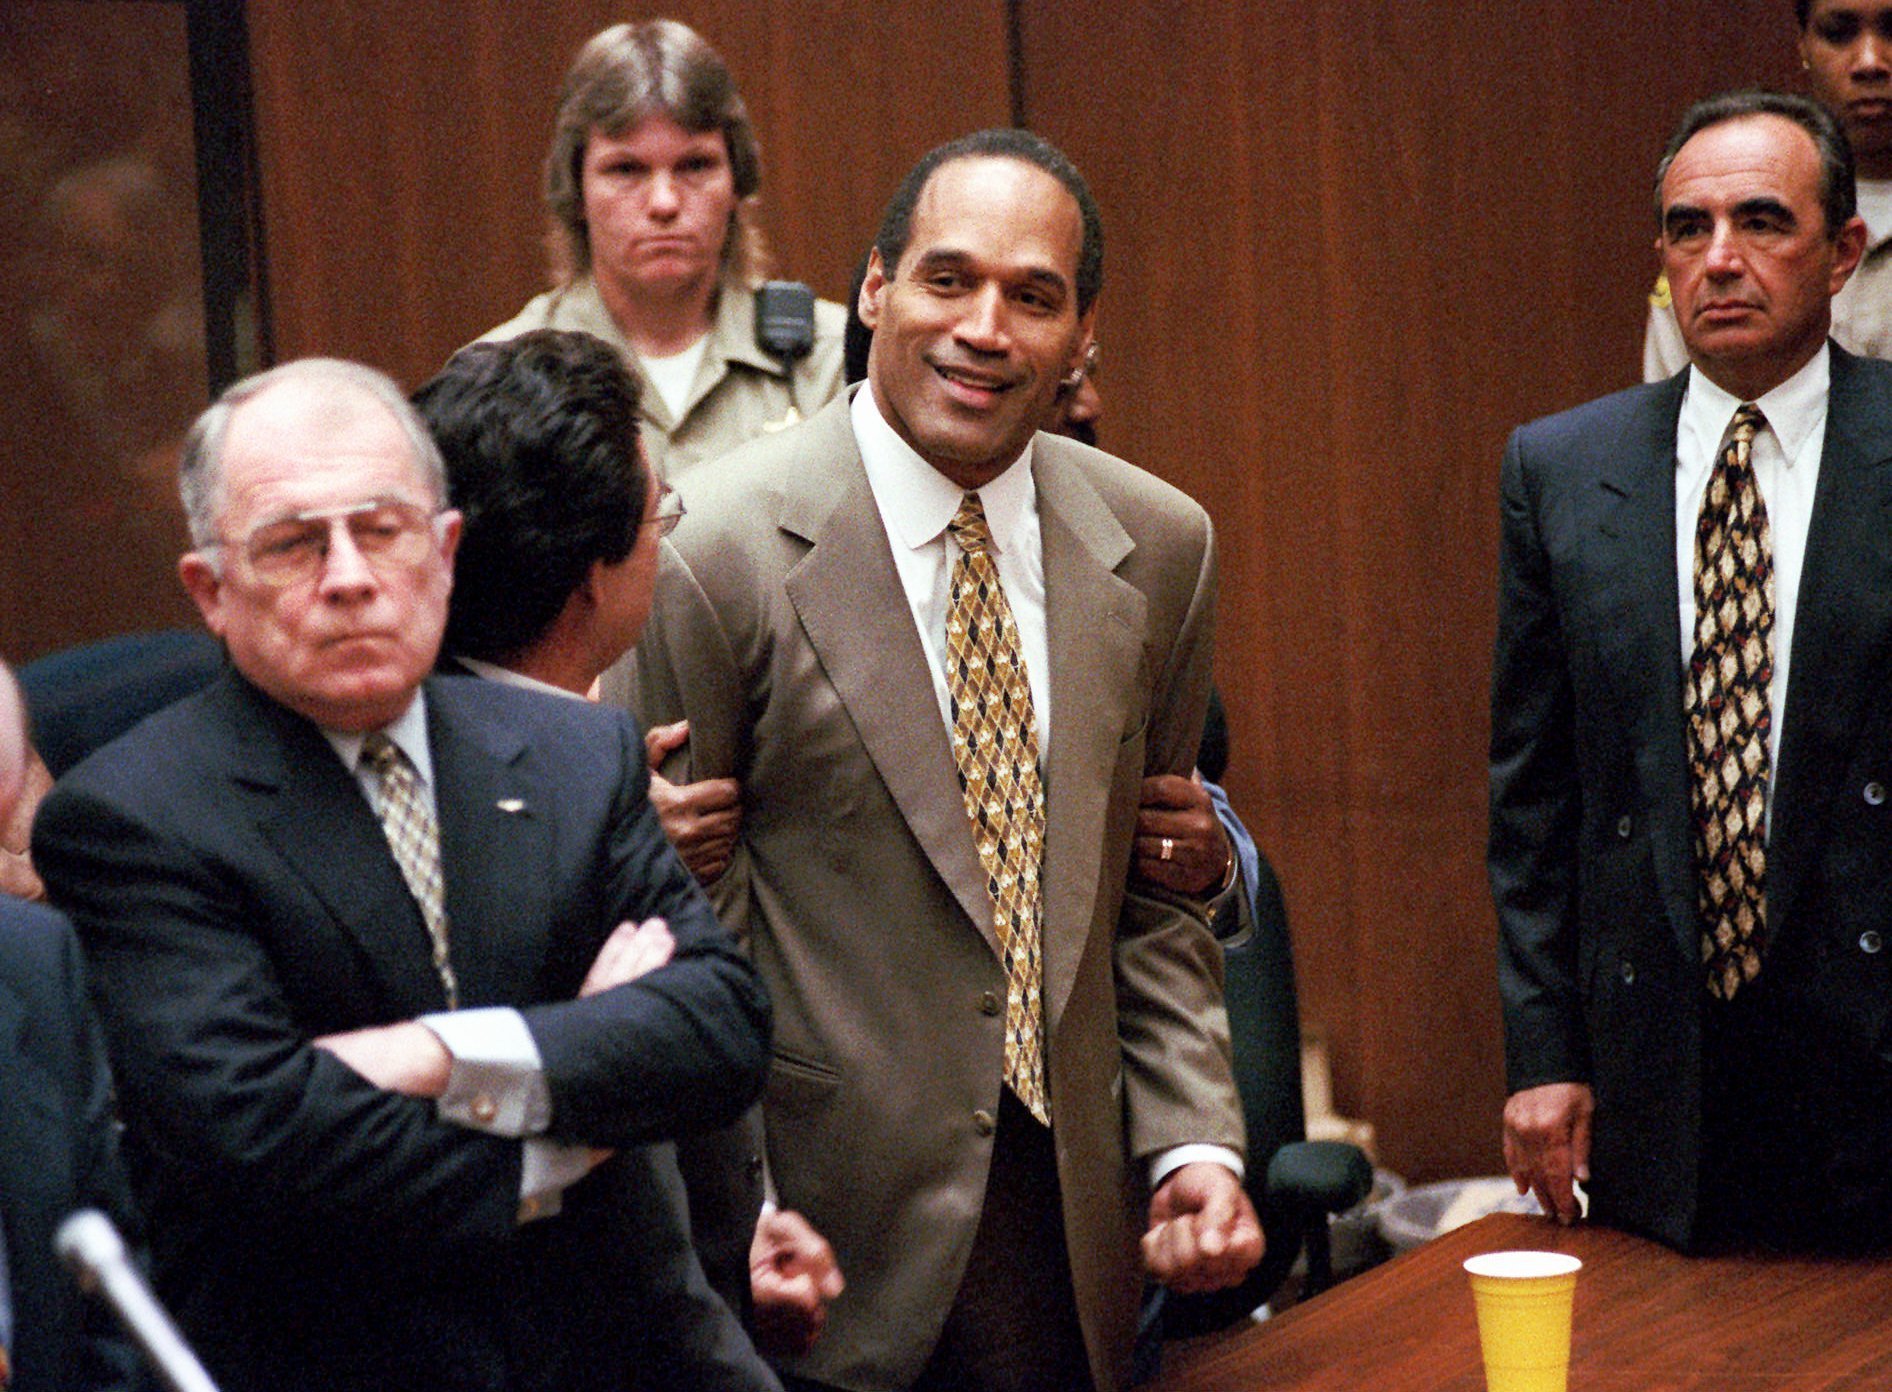 Twenty years later, O.J. Simpson case still makes for suspenseful television - Times